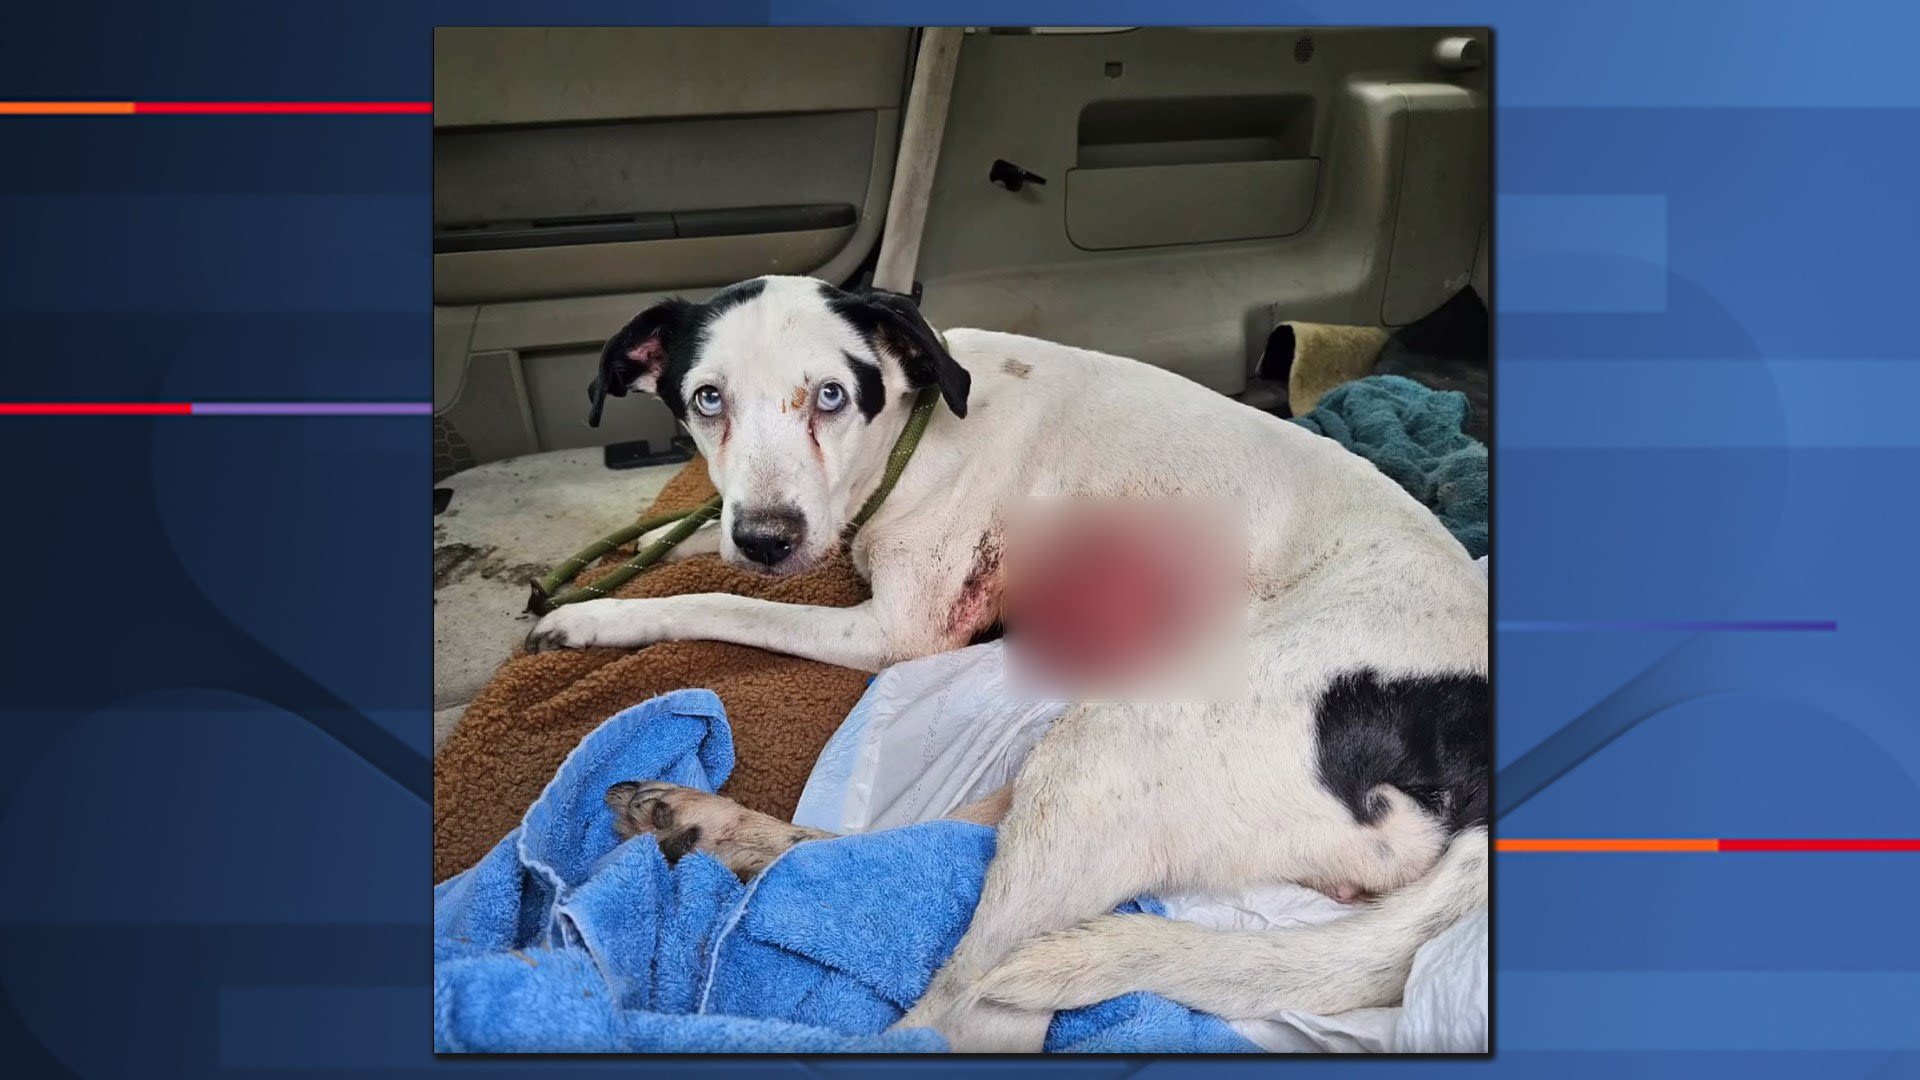 SLIDESHOW: Dog found abandoned, wounded in deplorable conditions in Warren